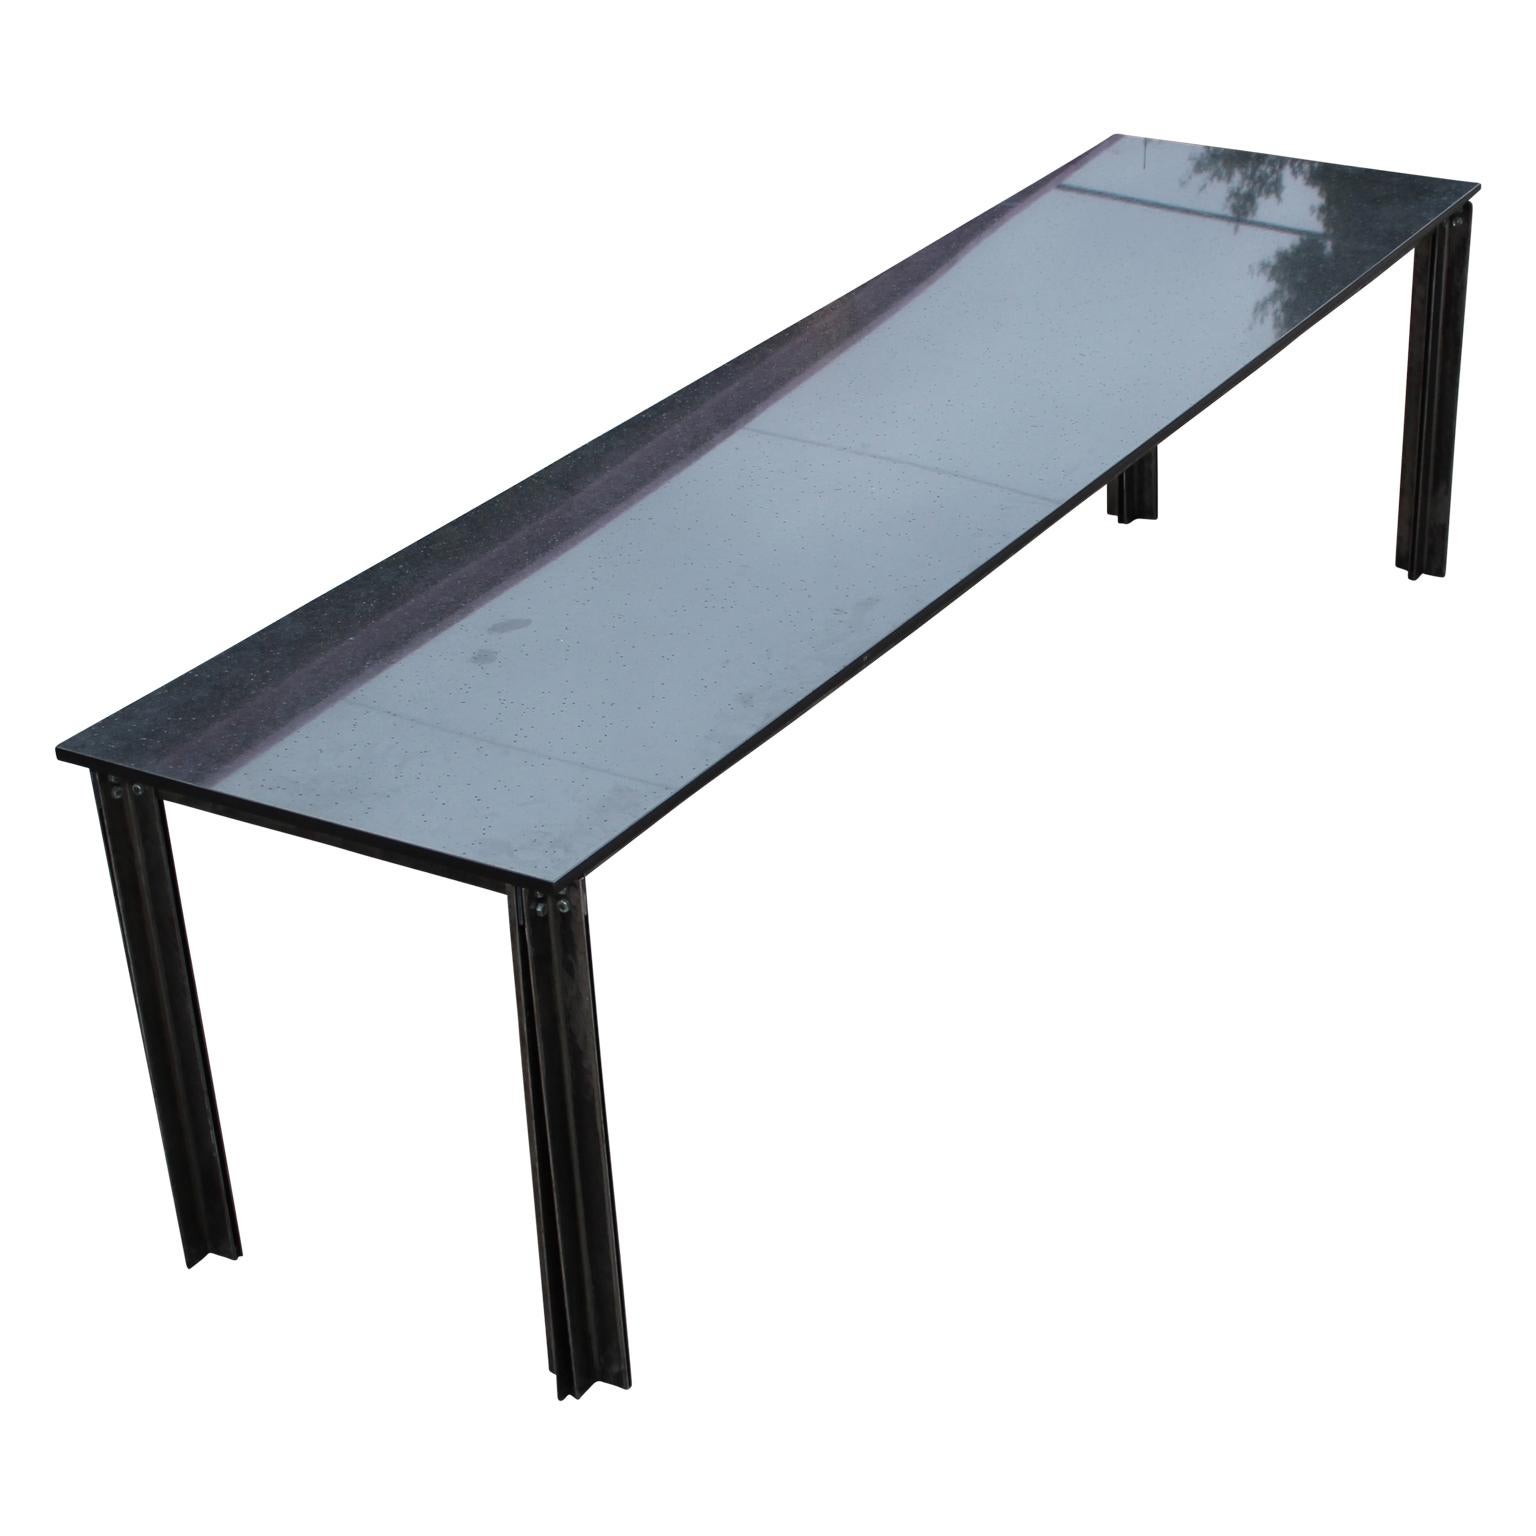 Lovely modern industrial steel and granite top conference or dining table, circa 2000s.